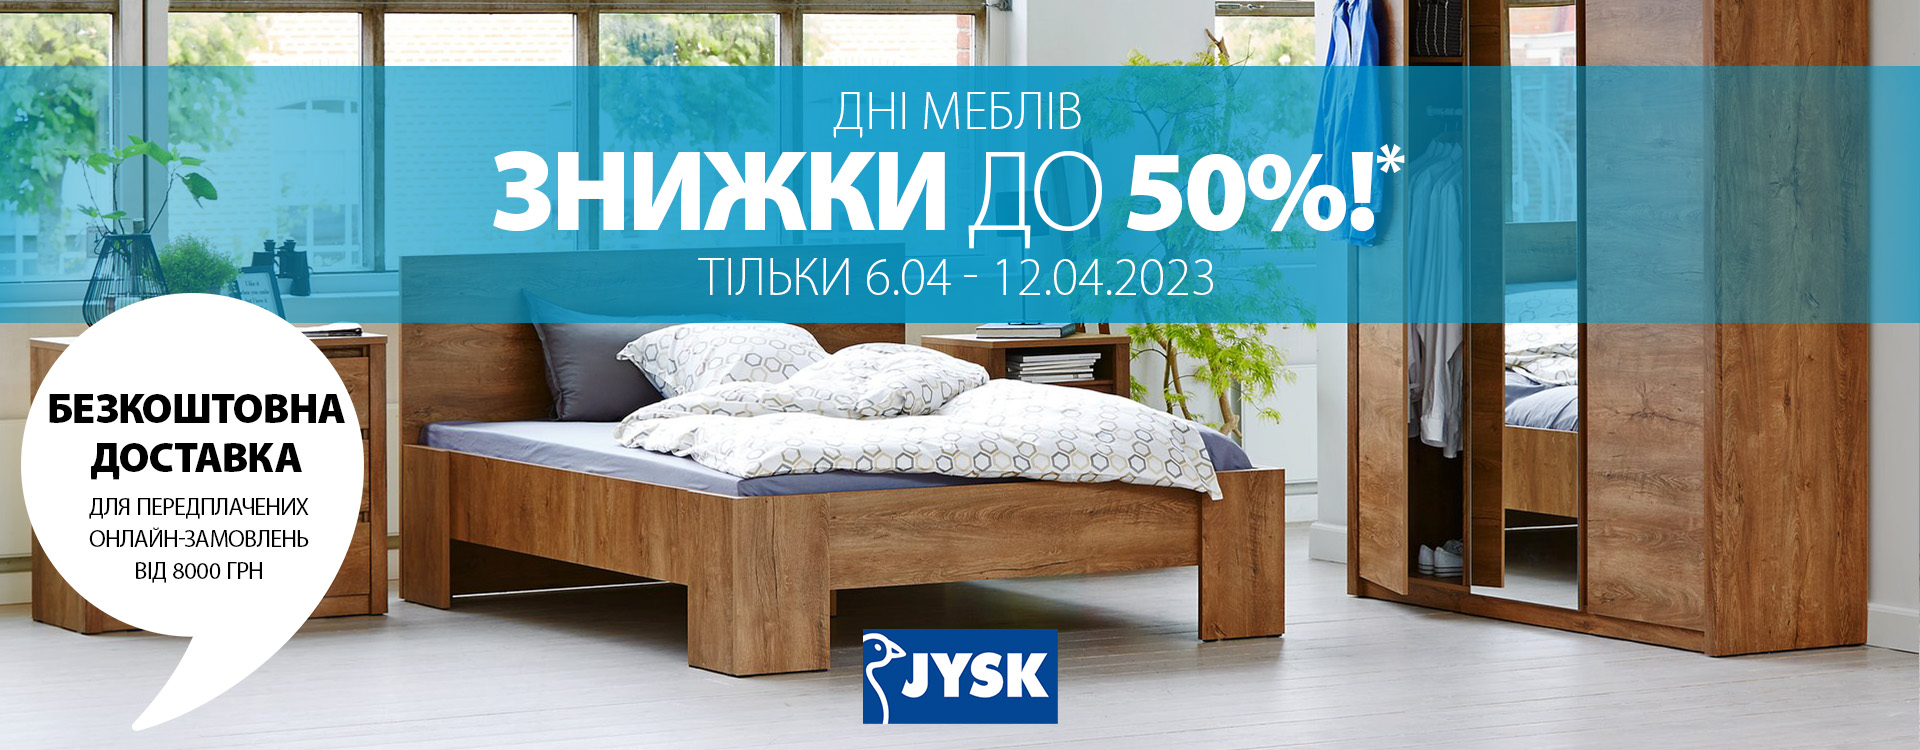 Furniture days - discounts up to 50%